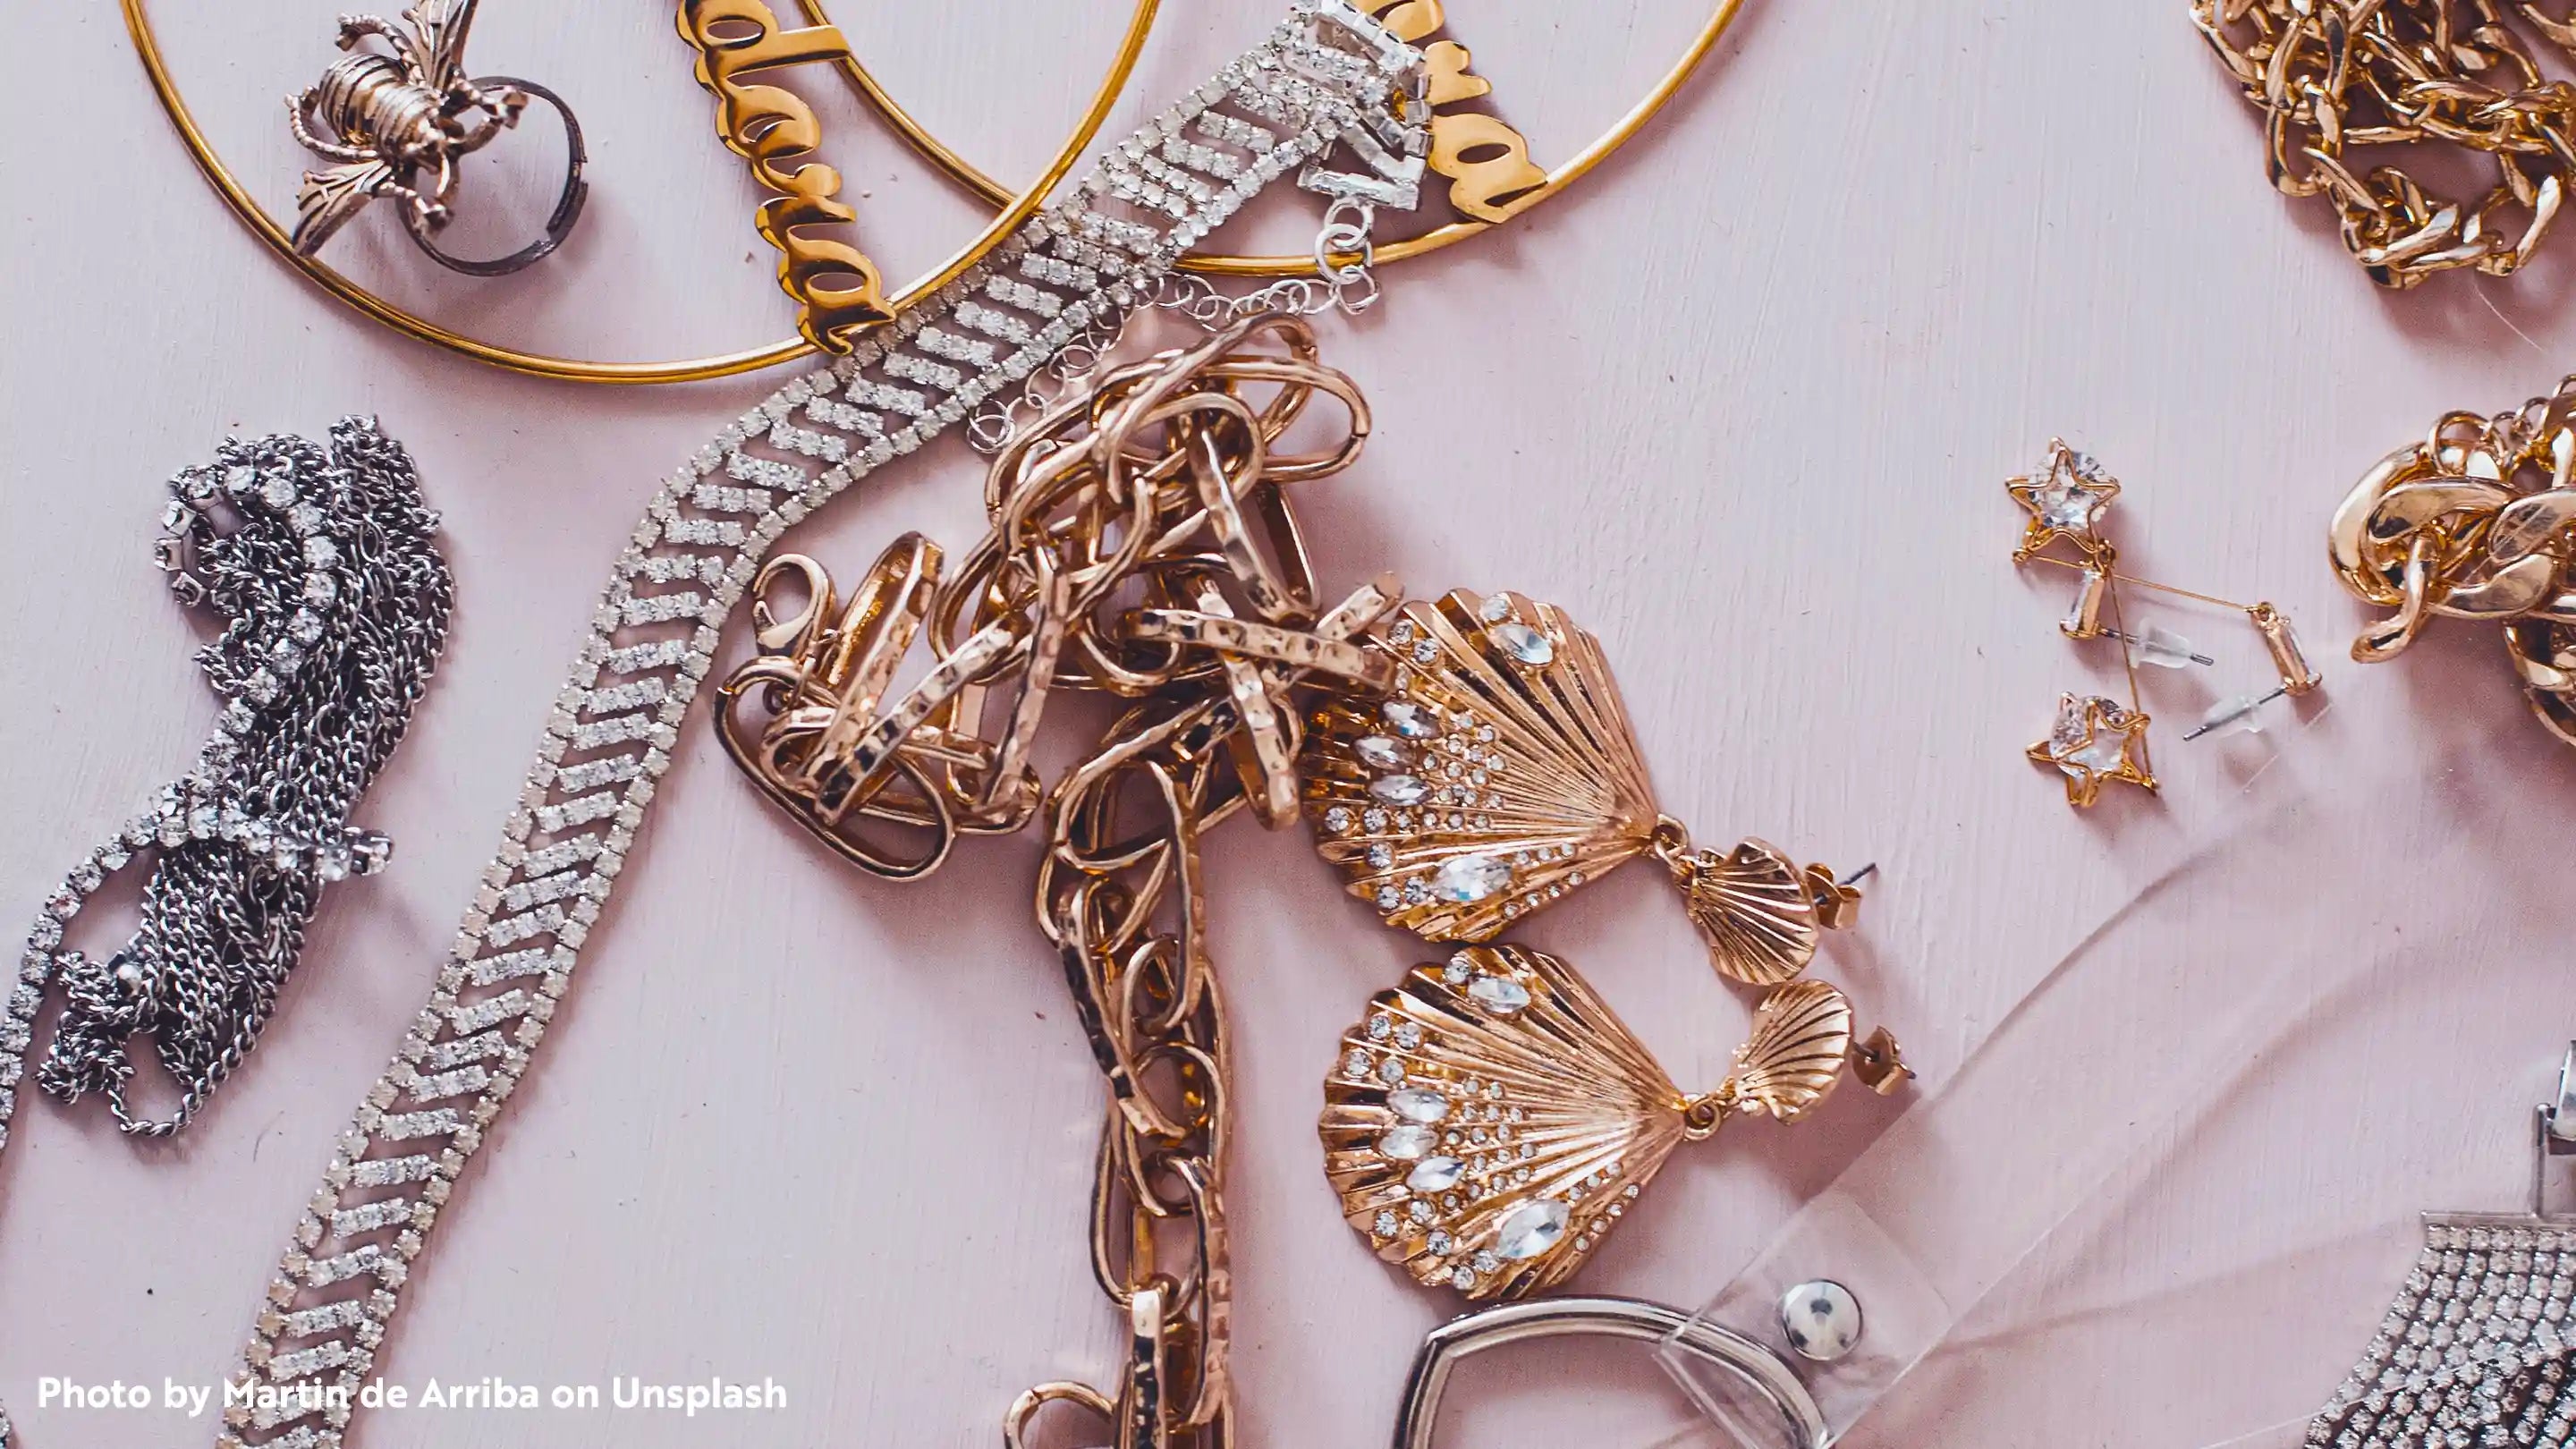 Different types of gold and silver jewelry on a pink background